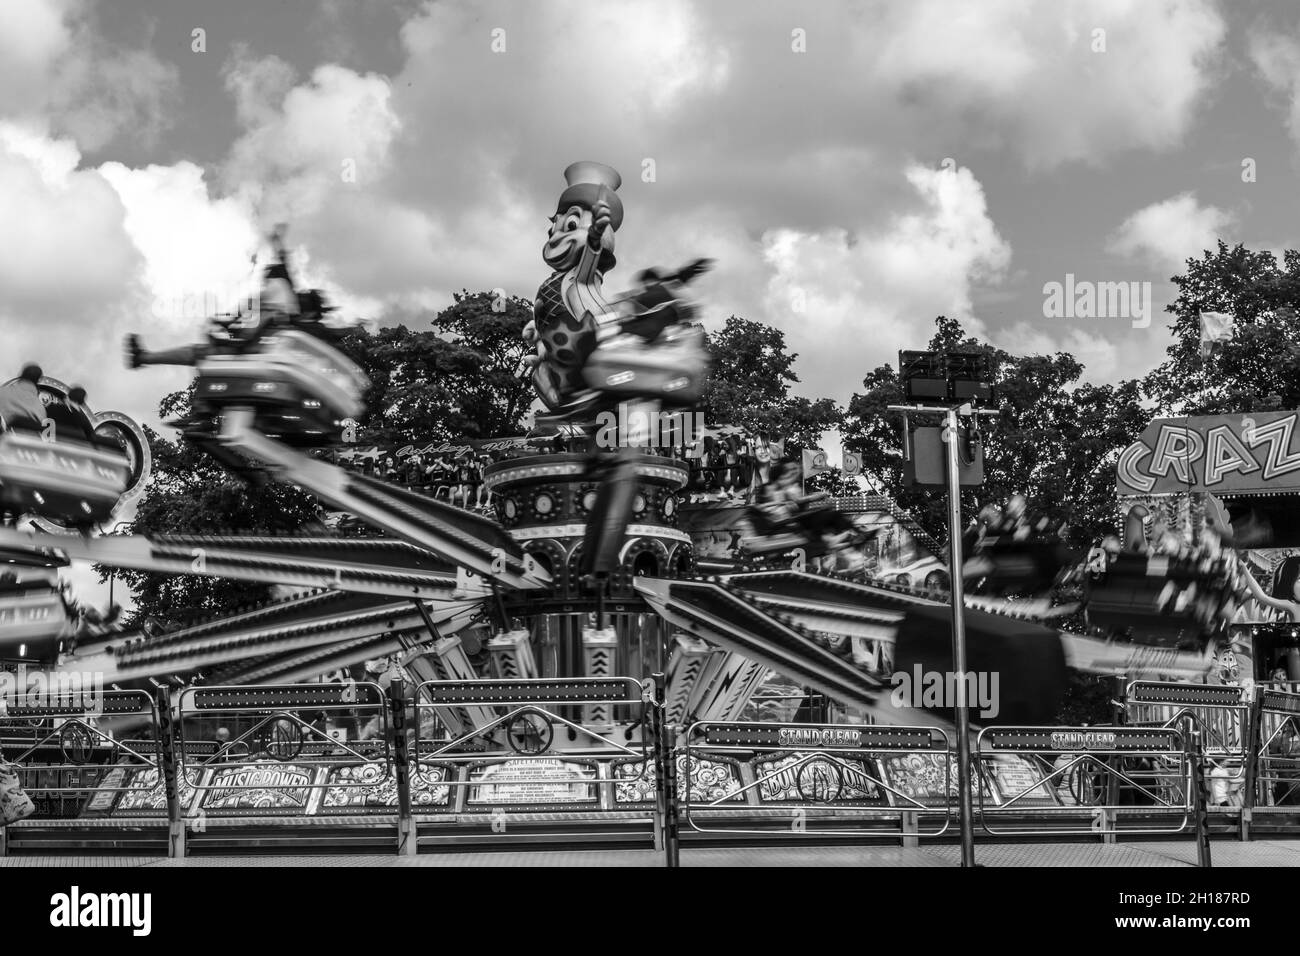 The speed of the Octopus fairground ride seen in monochrome. Taken in 'The Walks', Kings Lynn on 28th Aug 2021. Stock Photo